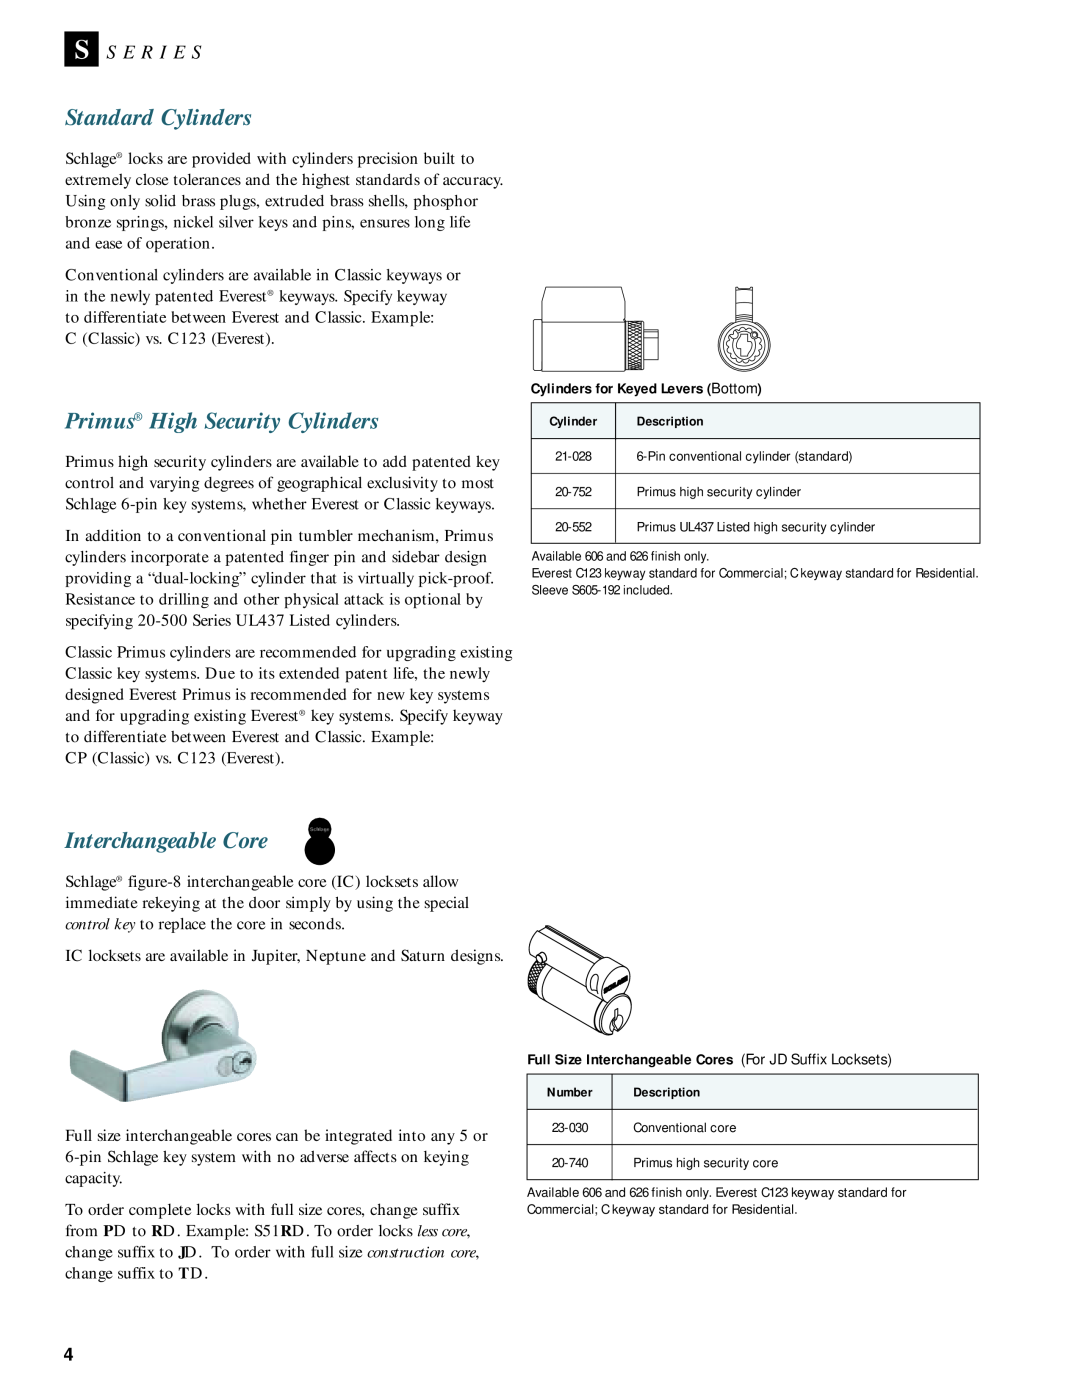 Schlage Door Locks manual Standard Cylinders, Primus High Security Cylinders, Interchangeable Core, S S E R I E S 